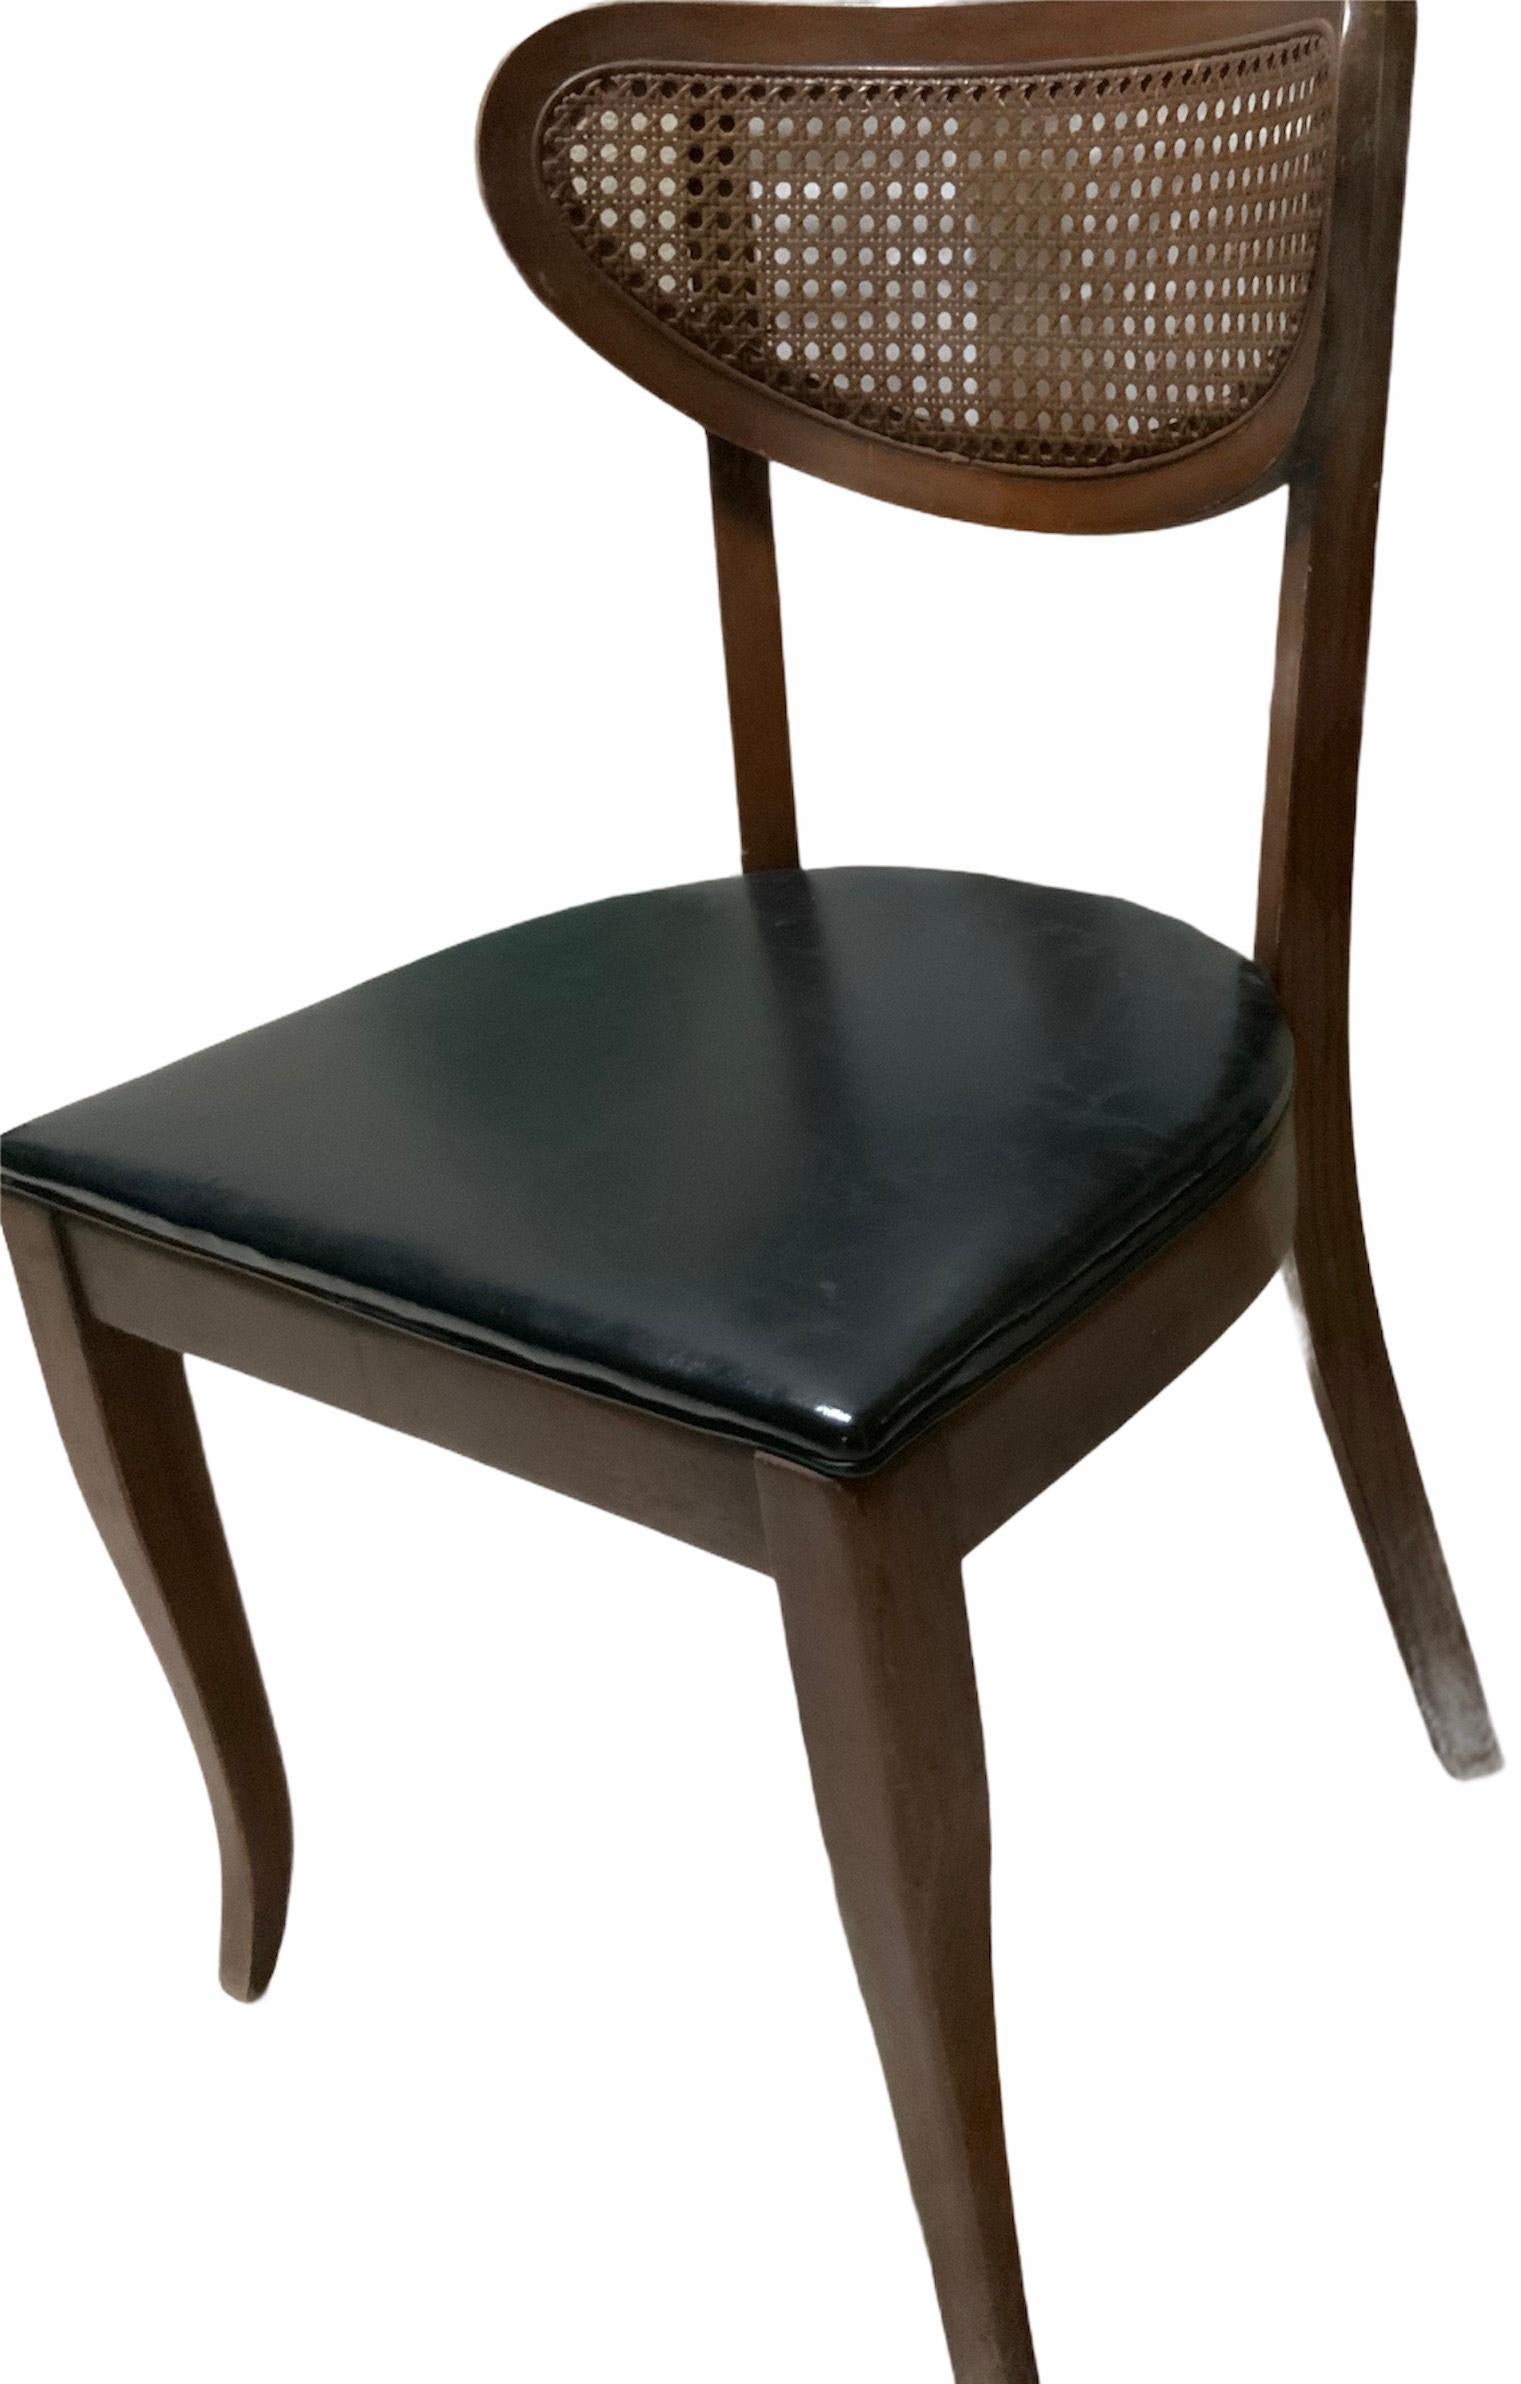 This is a danish style solid wood chair. It’s back is elliptical shaped and made of a caned net. The seat is a wide“D”shaped one and is upholstered with black leather like fabric. The chair is supported by two four sided tapered legs in the back and